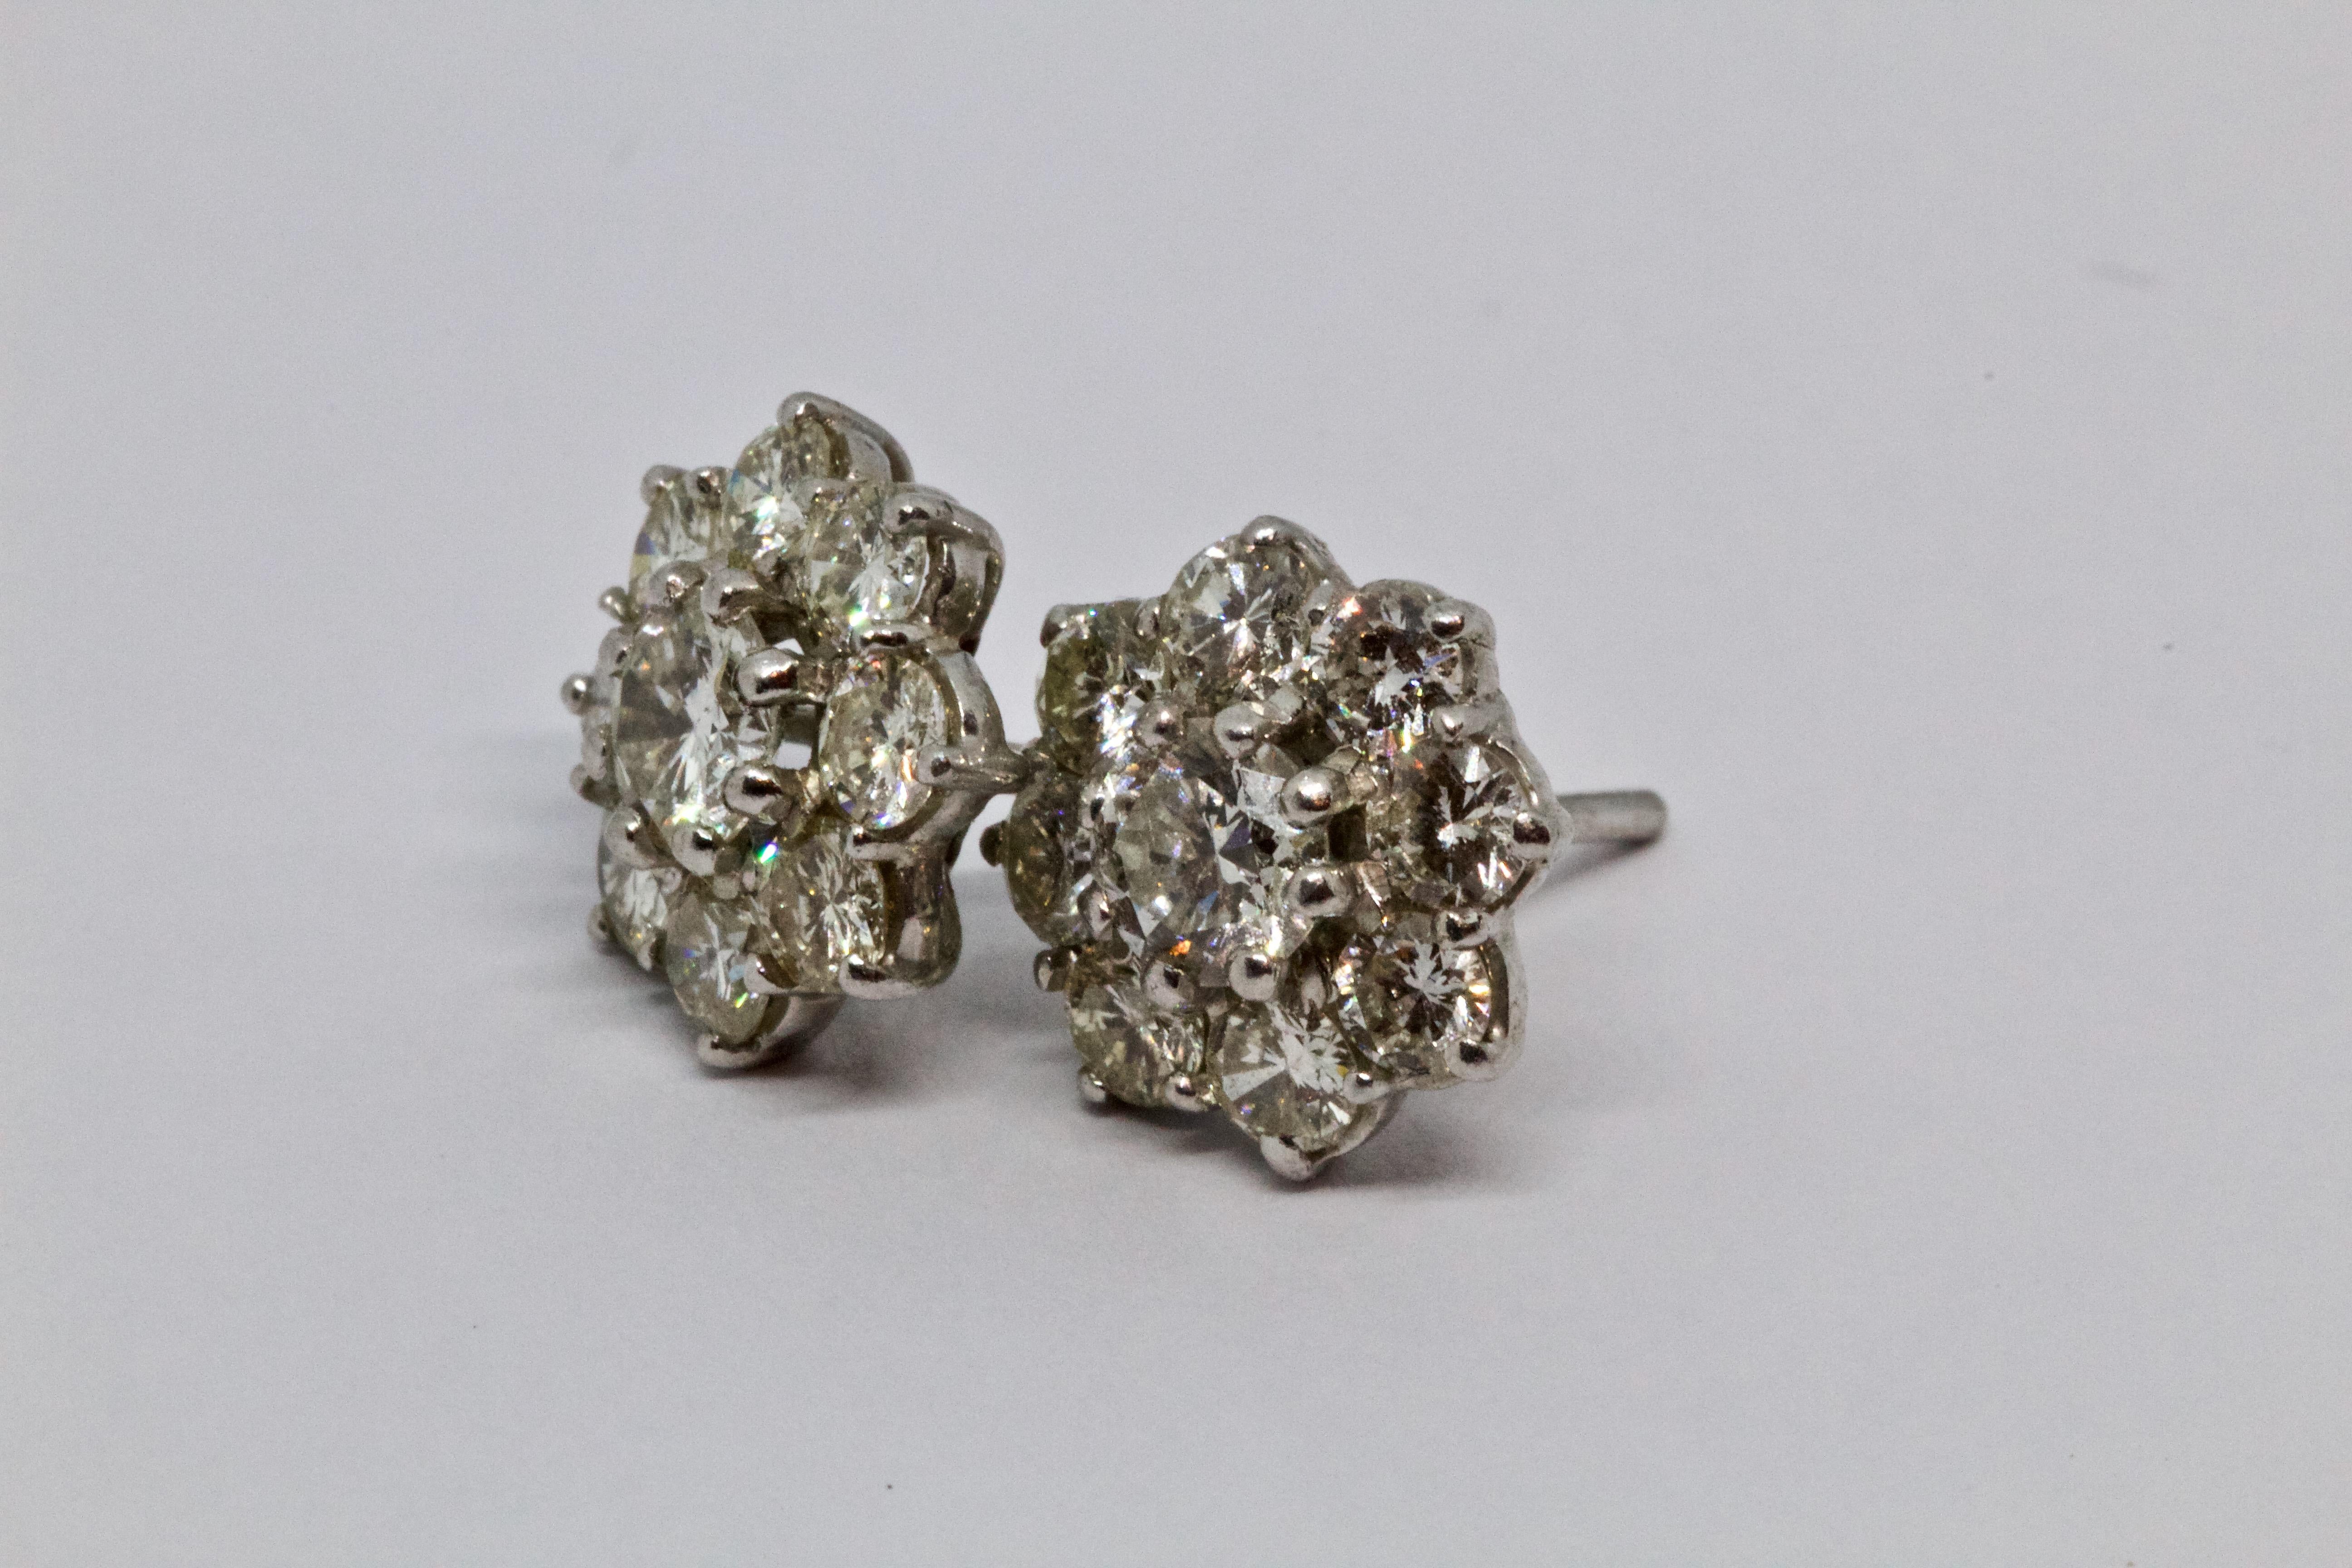 A flower-shaped cluster of round brilliant cut white diamonds that weigh a total of 2.6 carats, with scalloped edges and a lot of vintage charm. For she who desires a classic pair of earrings for daily wear, but does not want the monotony of plain